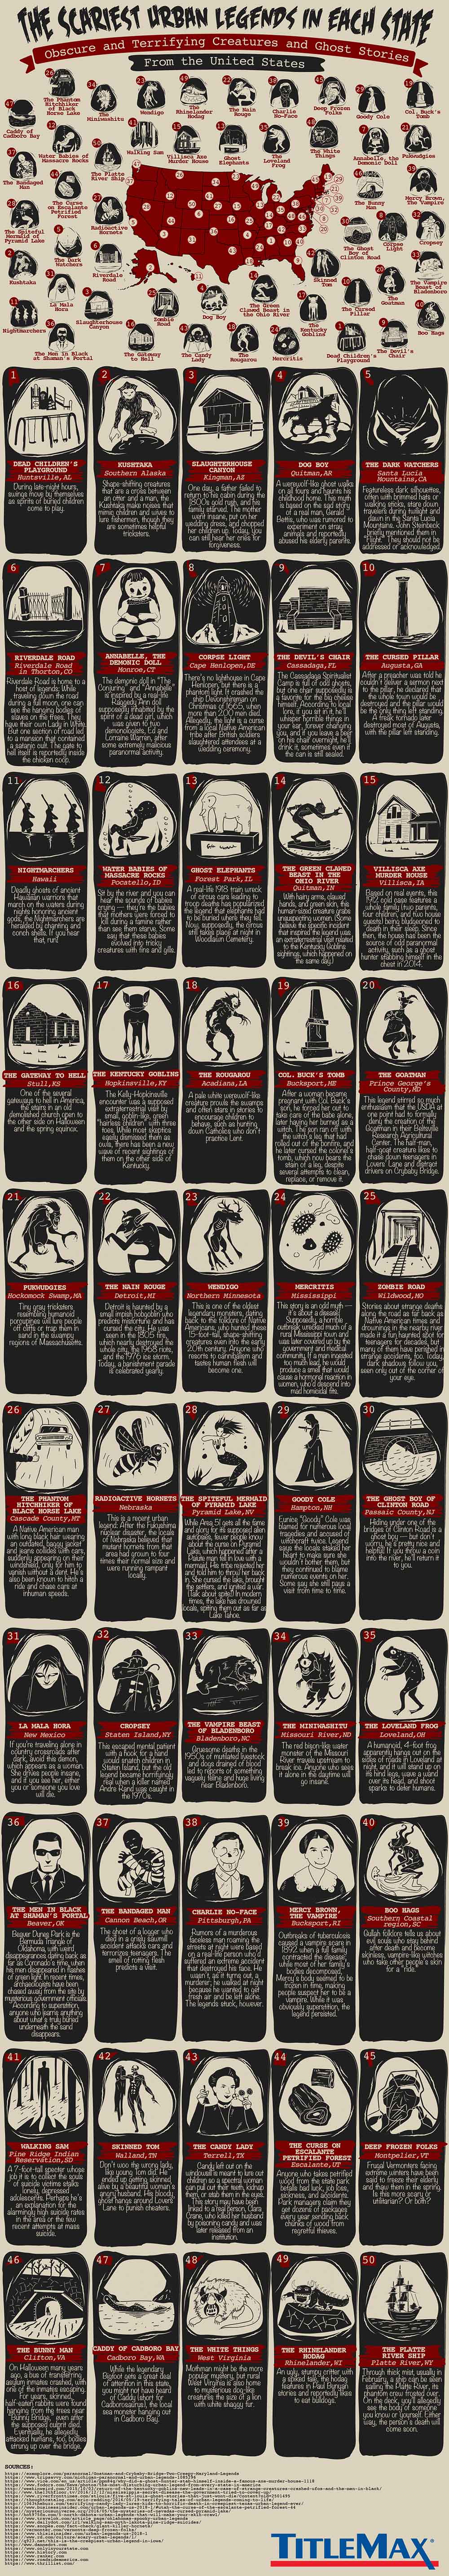 The Scariest Urban Legends in Each State